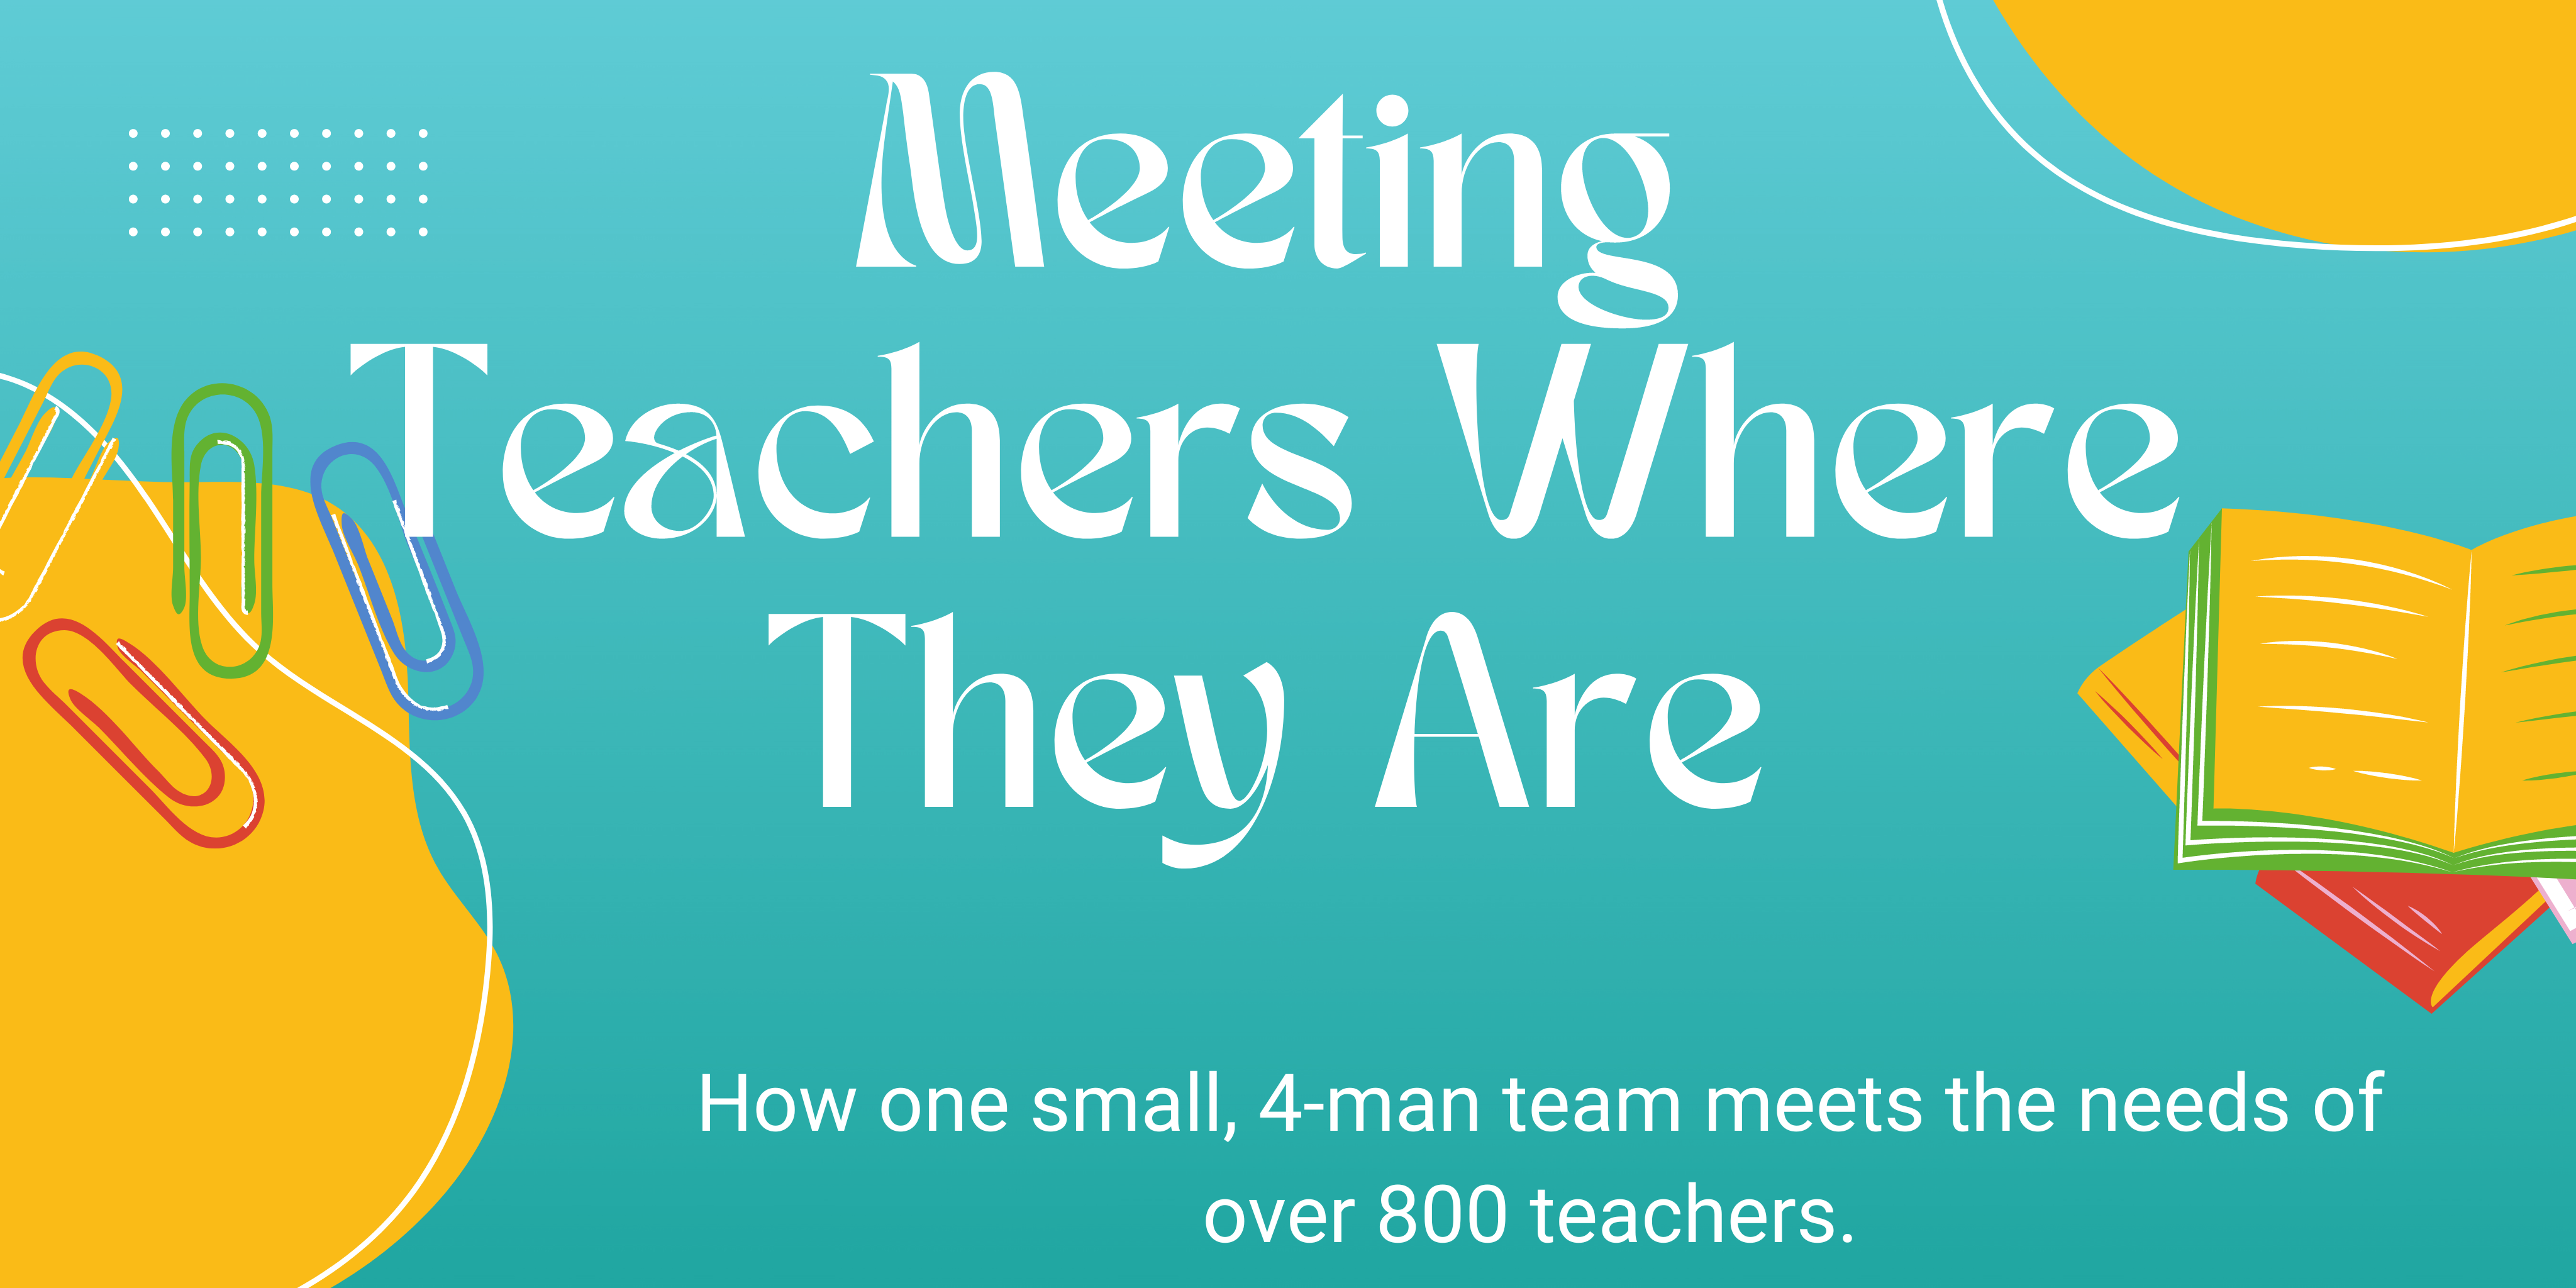 Image reads: Meeting Teachers where they are. How one small, 4-man team meets the needs of over 800 teachers.